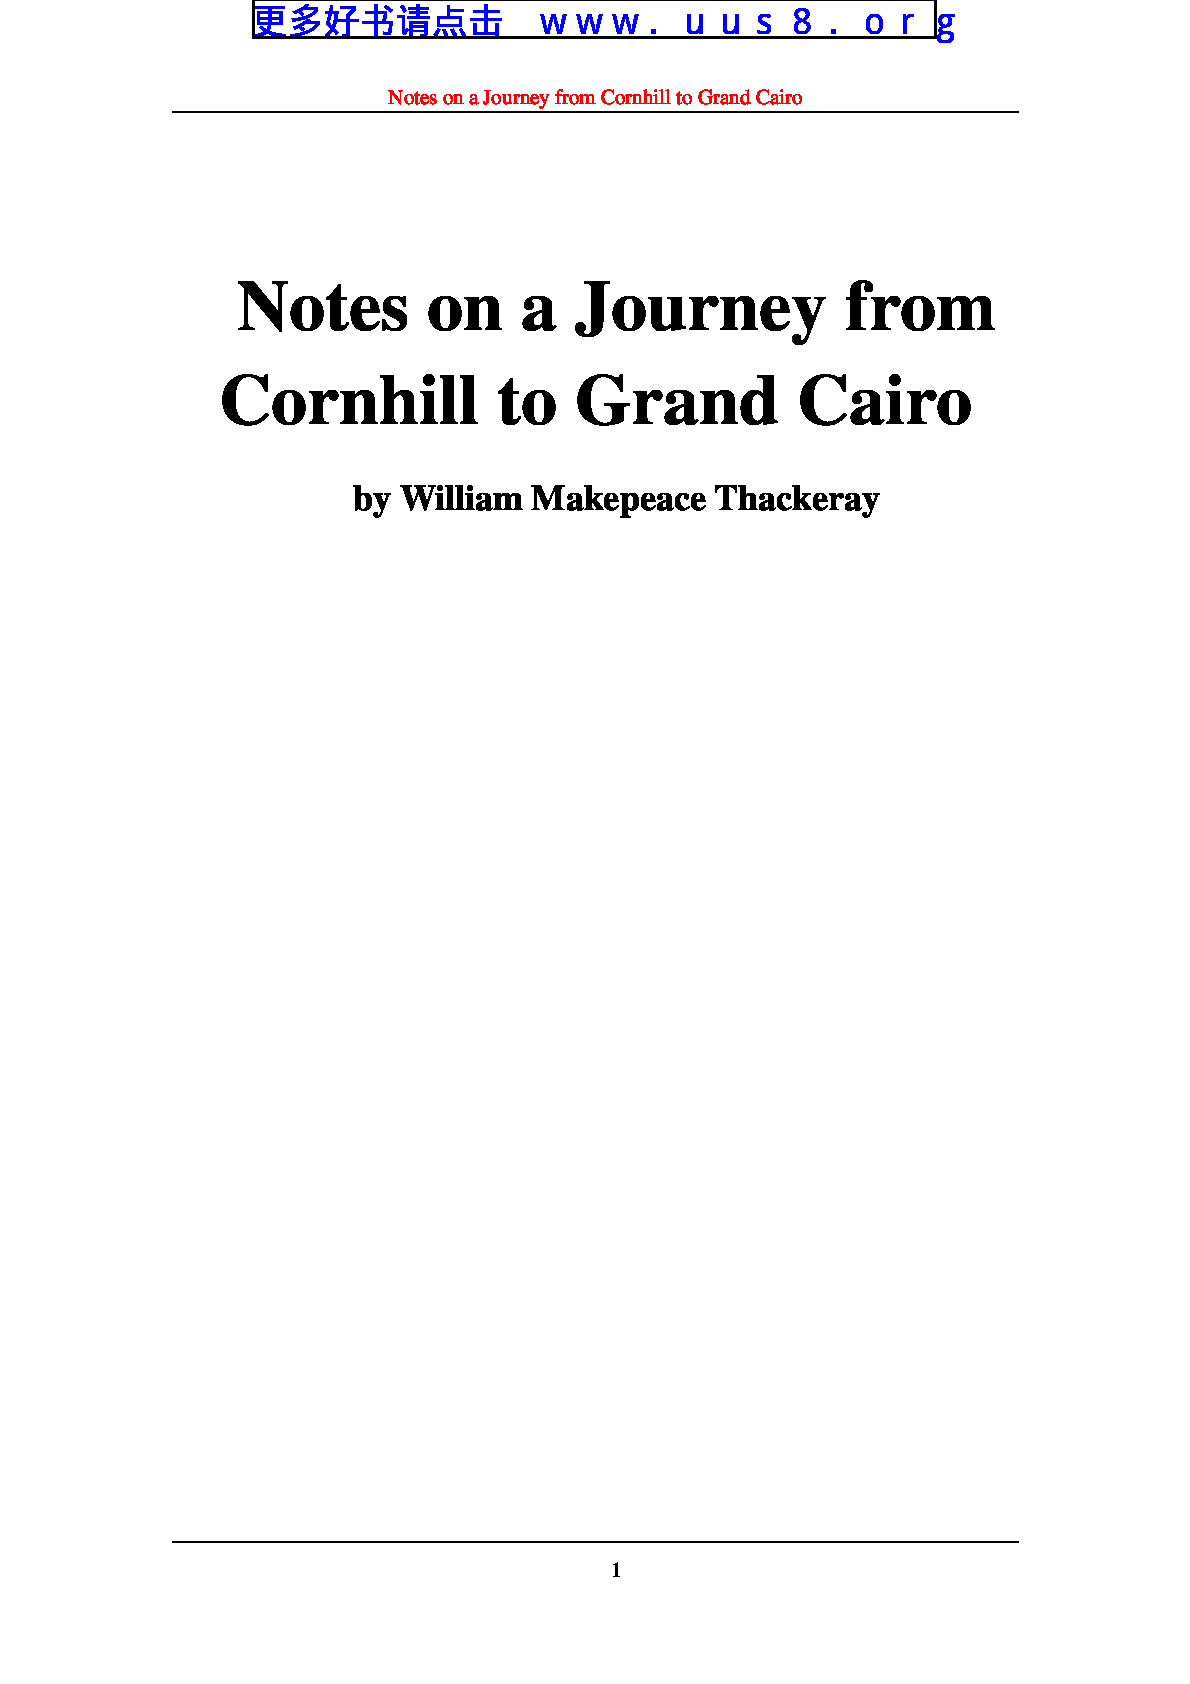 Notes_on_a_Journey_from_Cornhill_to_Grand_Cairo(从康希尔到大开罗)